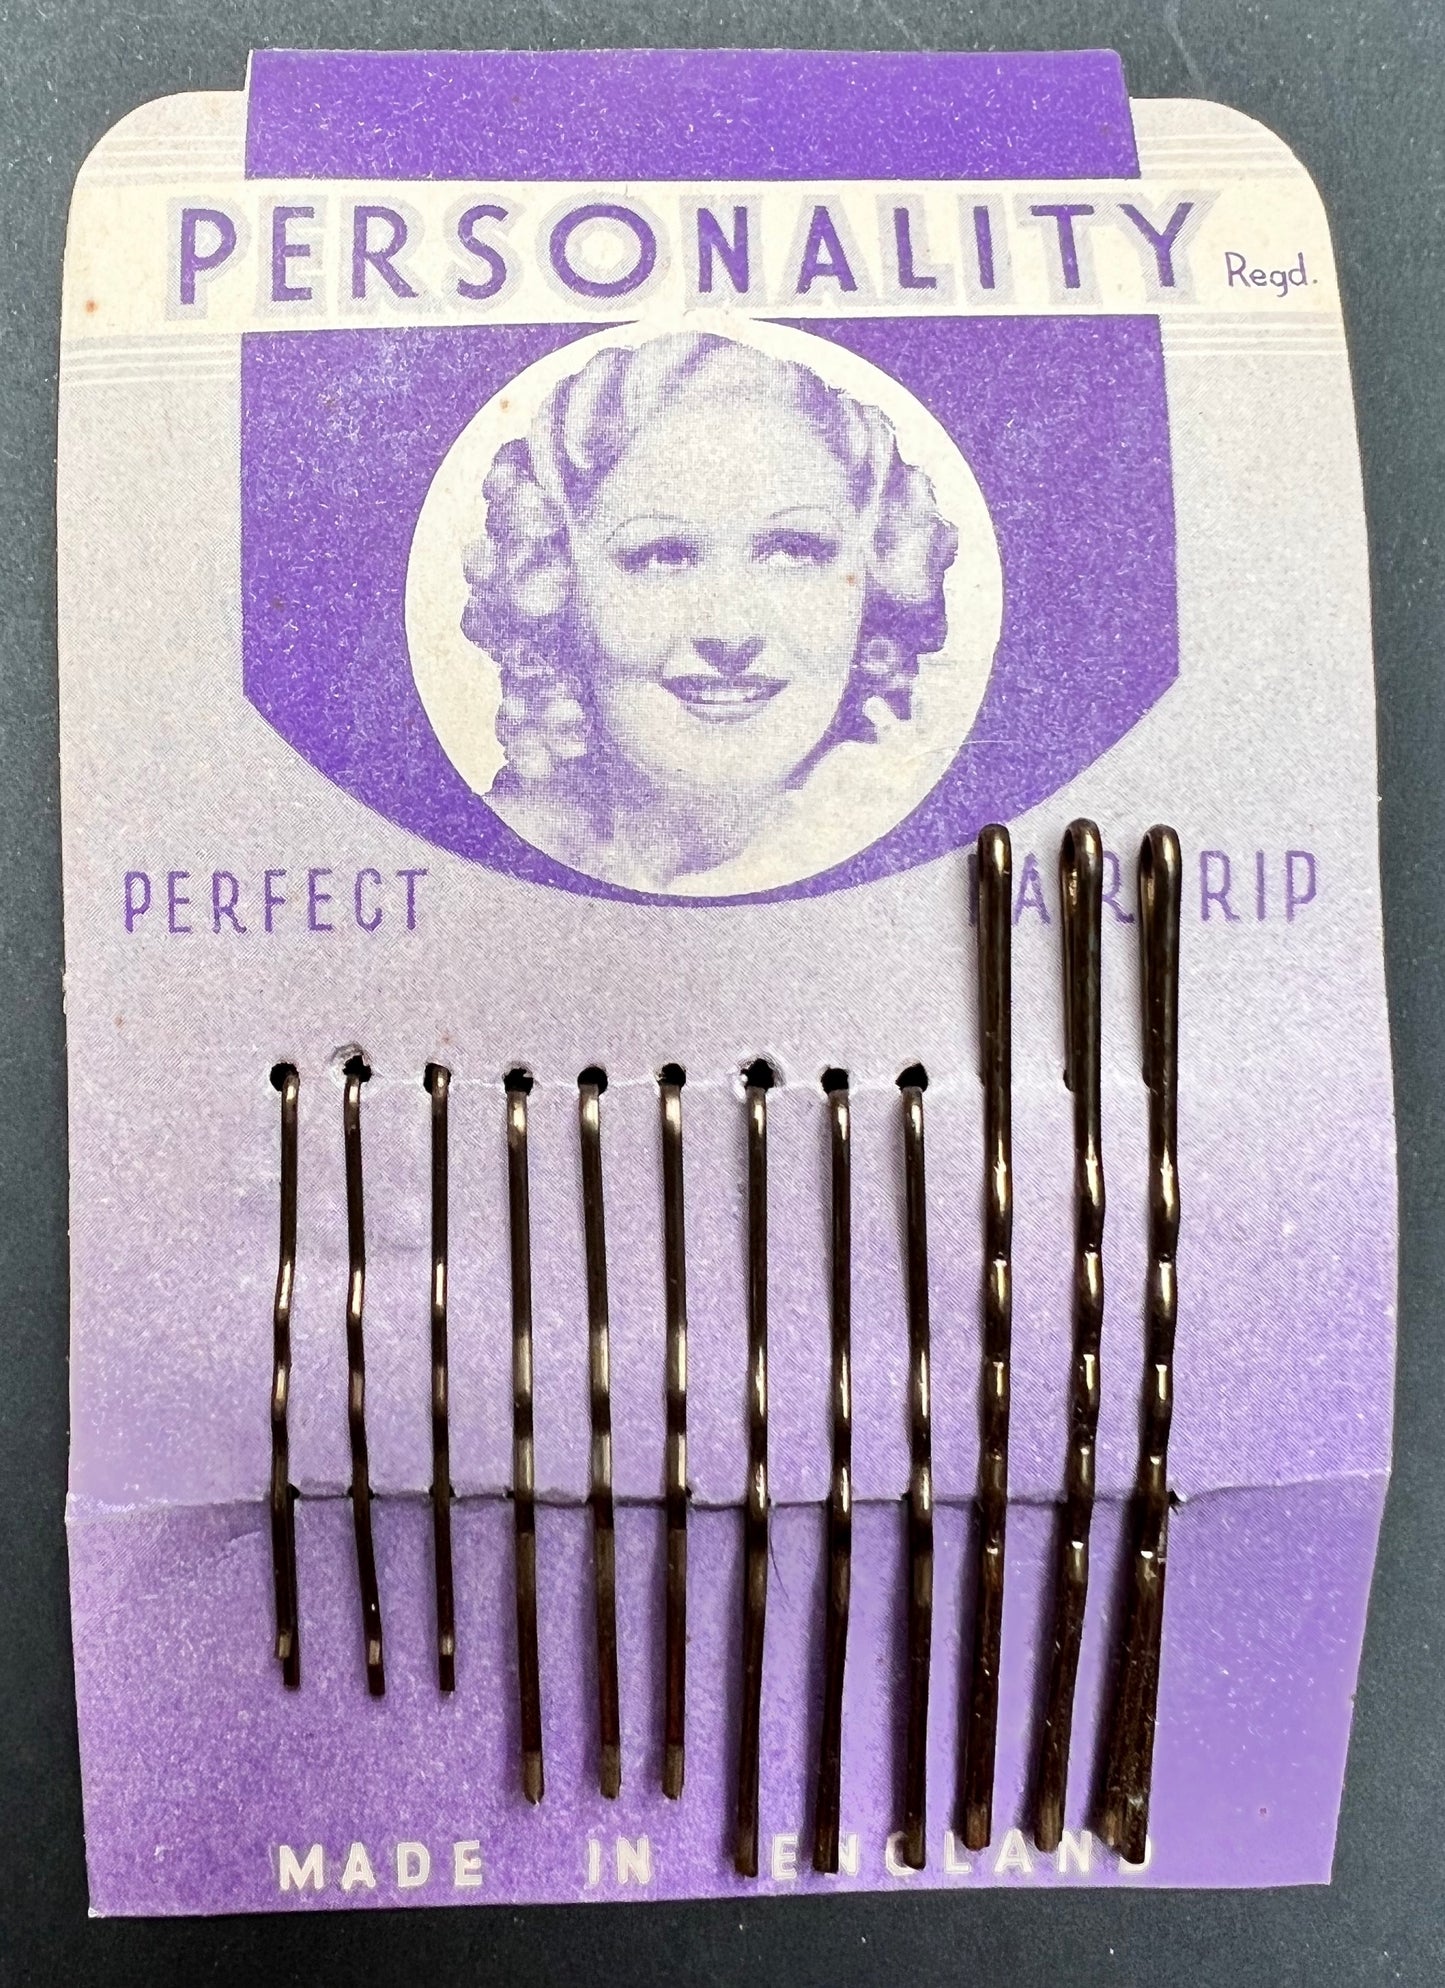 1940s "PERSONALITY "Perfect Grip" Hair Pin Display Card